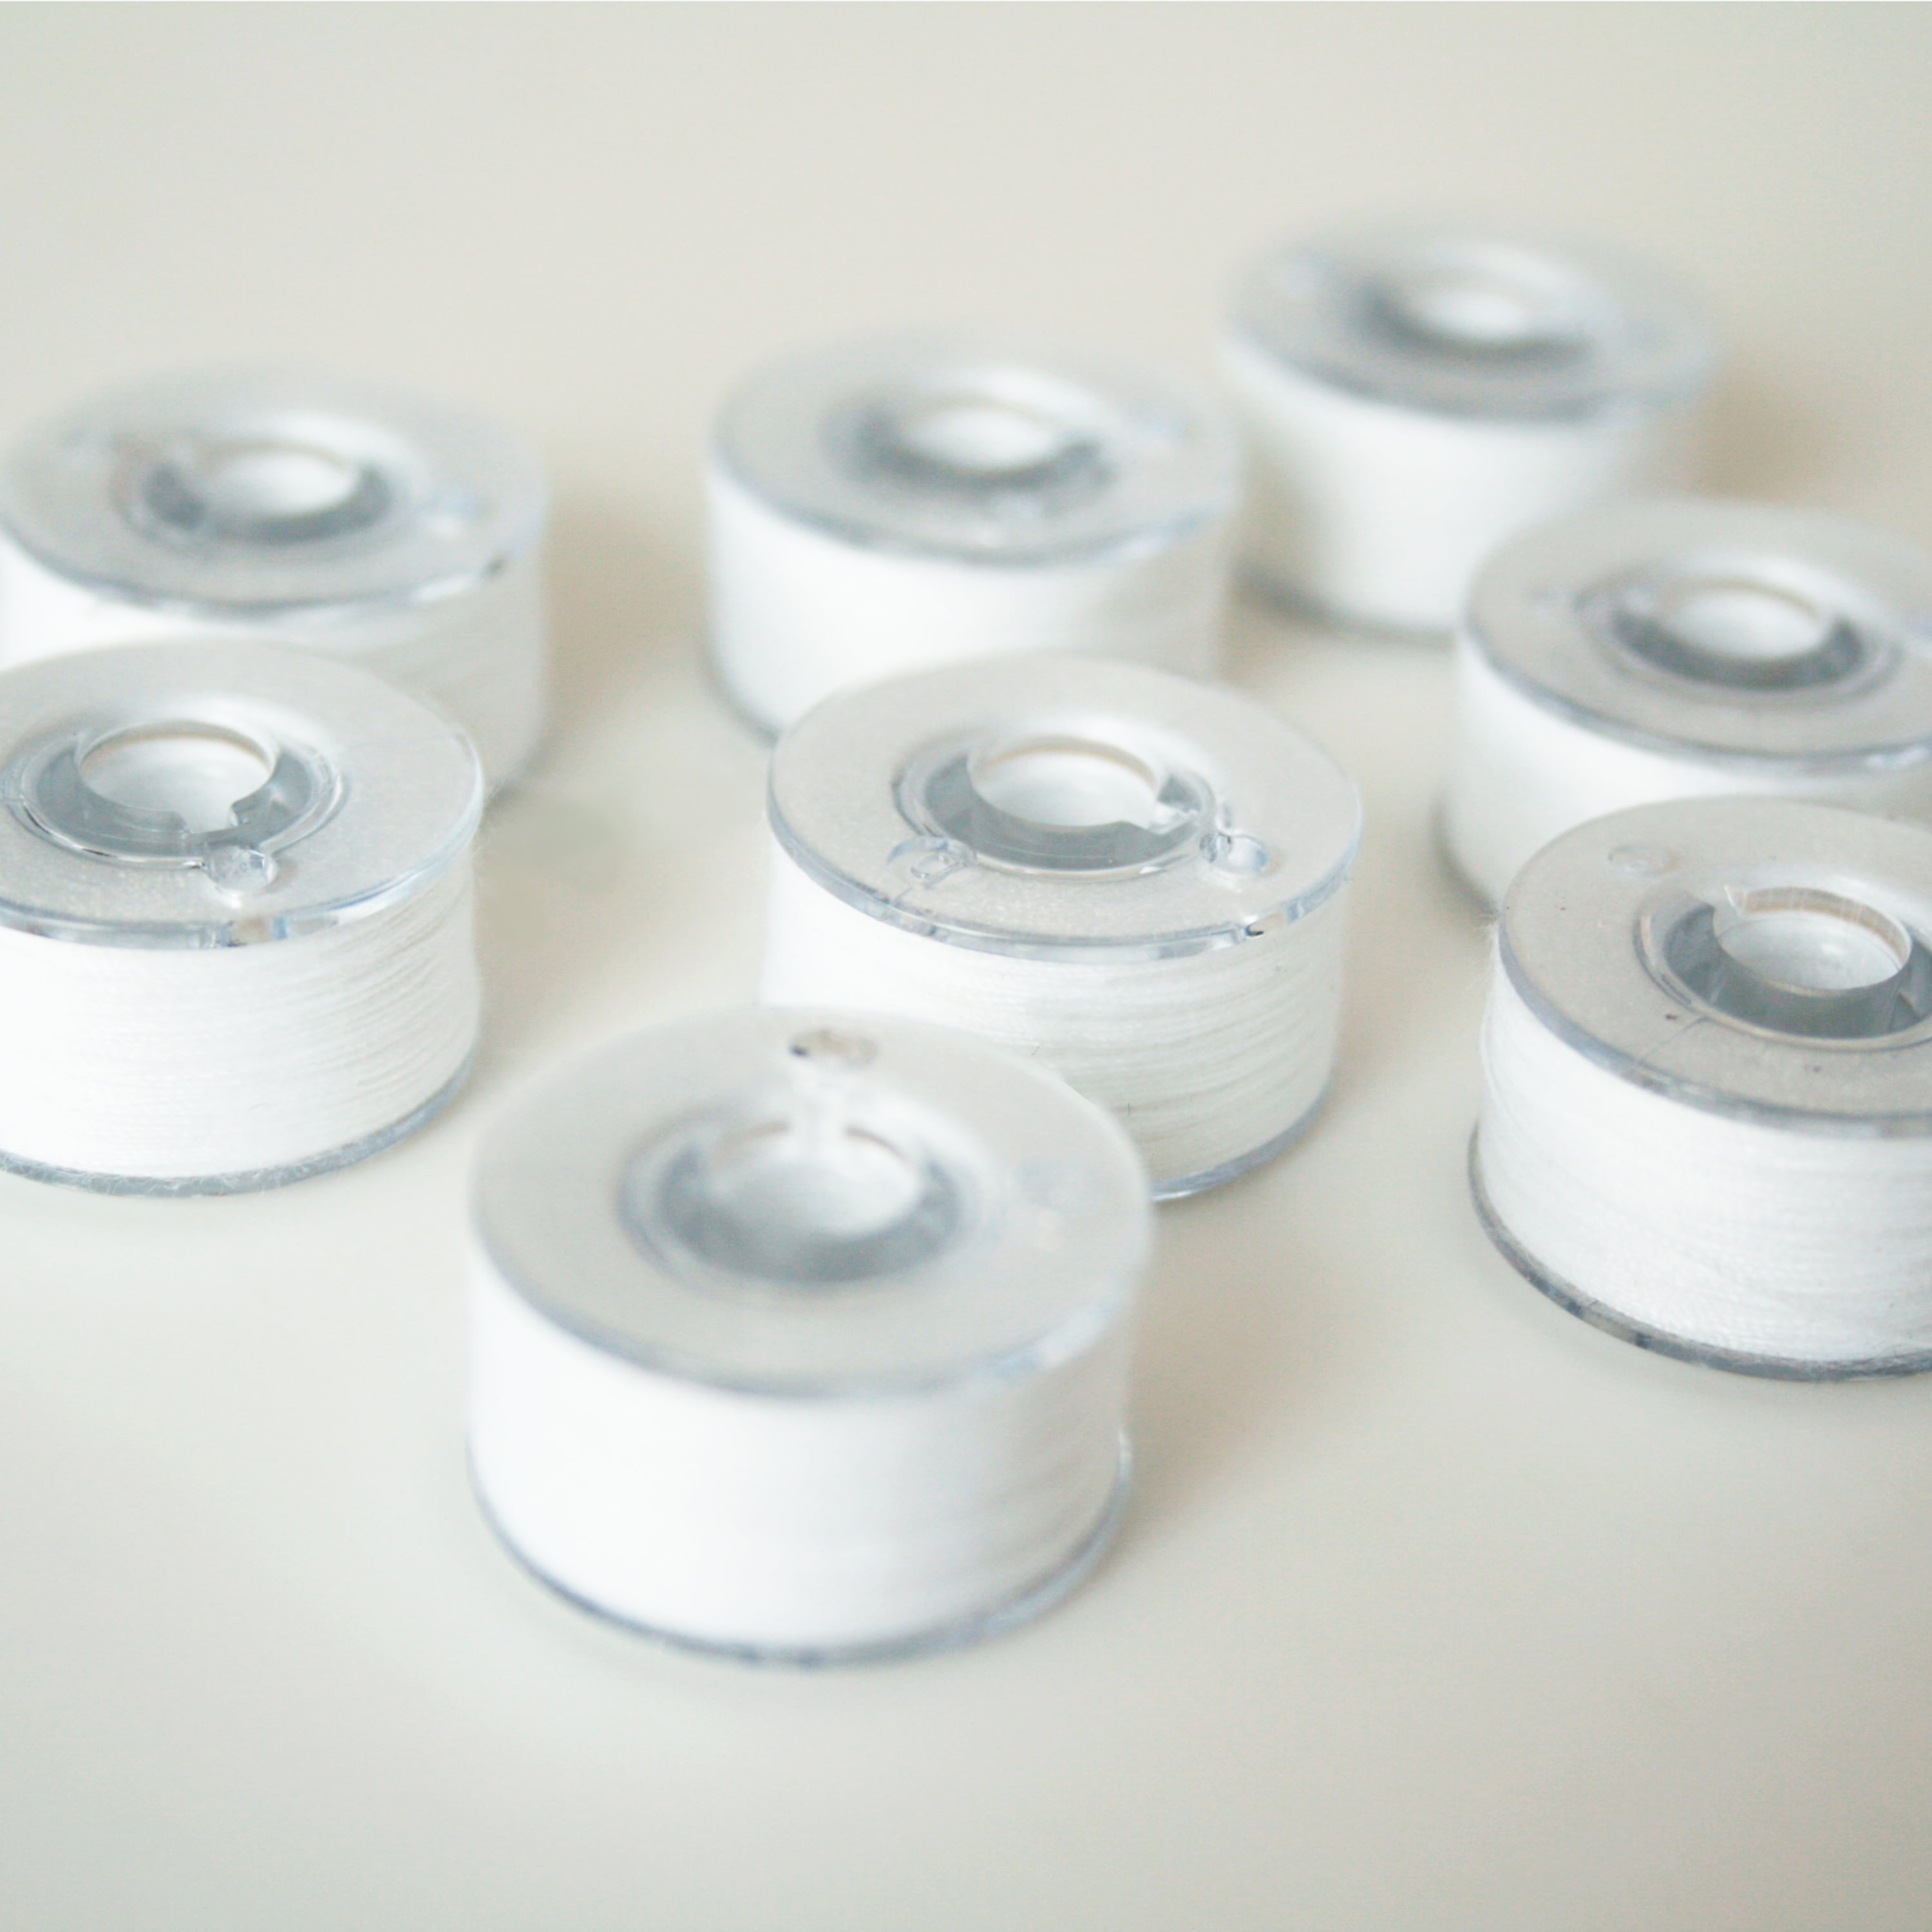 Pre-wound Embroidery Bobbins, #90 white, 9-pack 11.5 size Brother -  012502639497